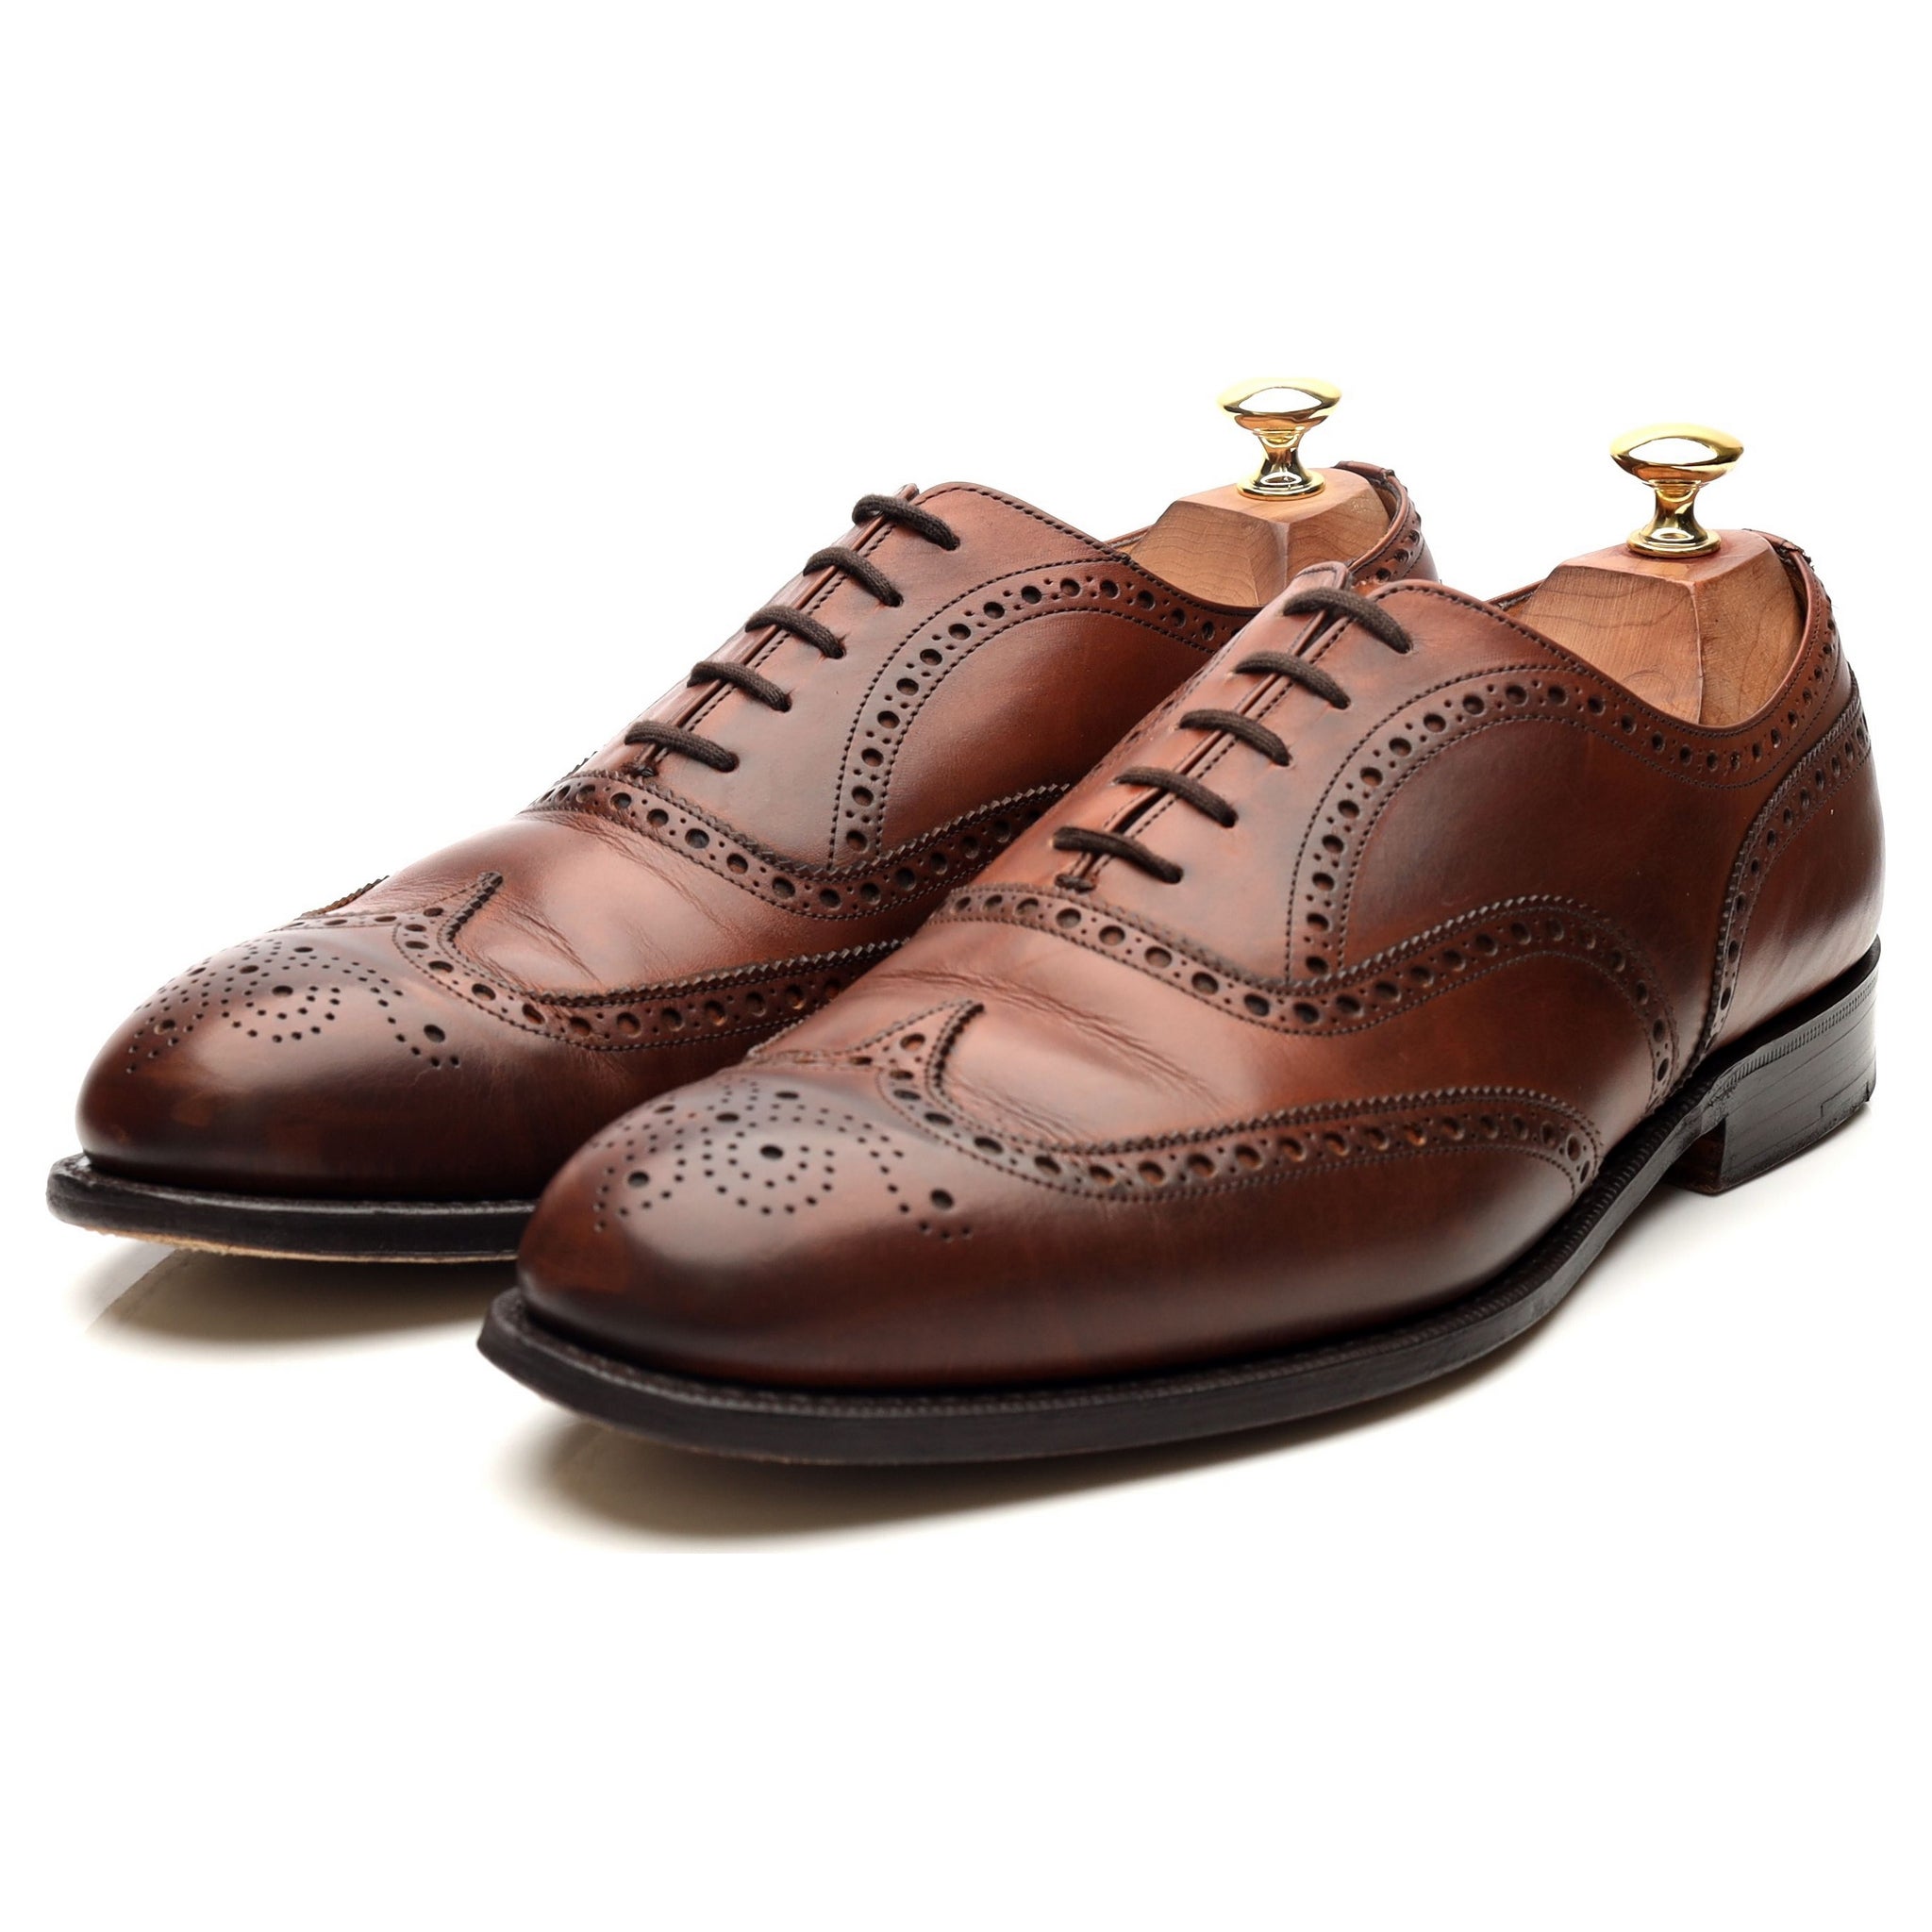 Chetwynd' Tan Brown Leather Brogues UK 9 G - Abbot's Shoes